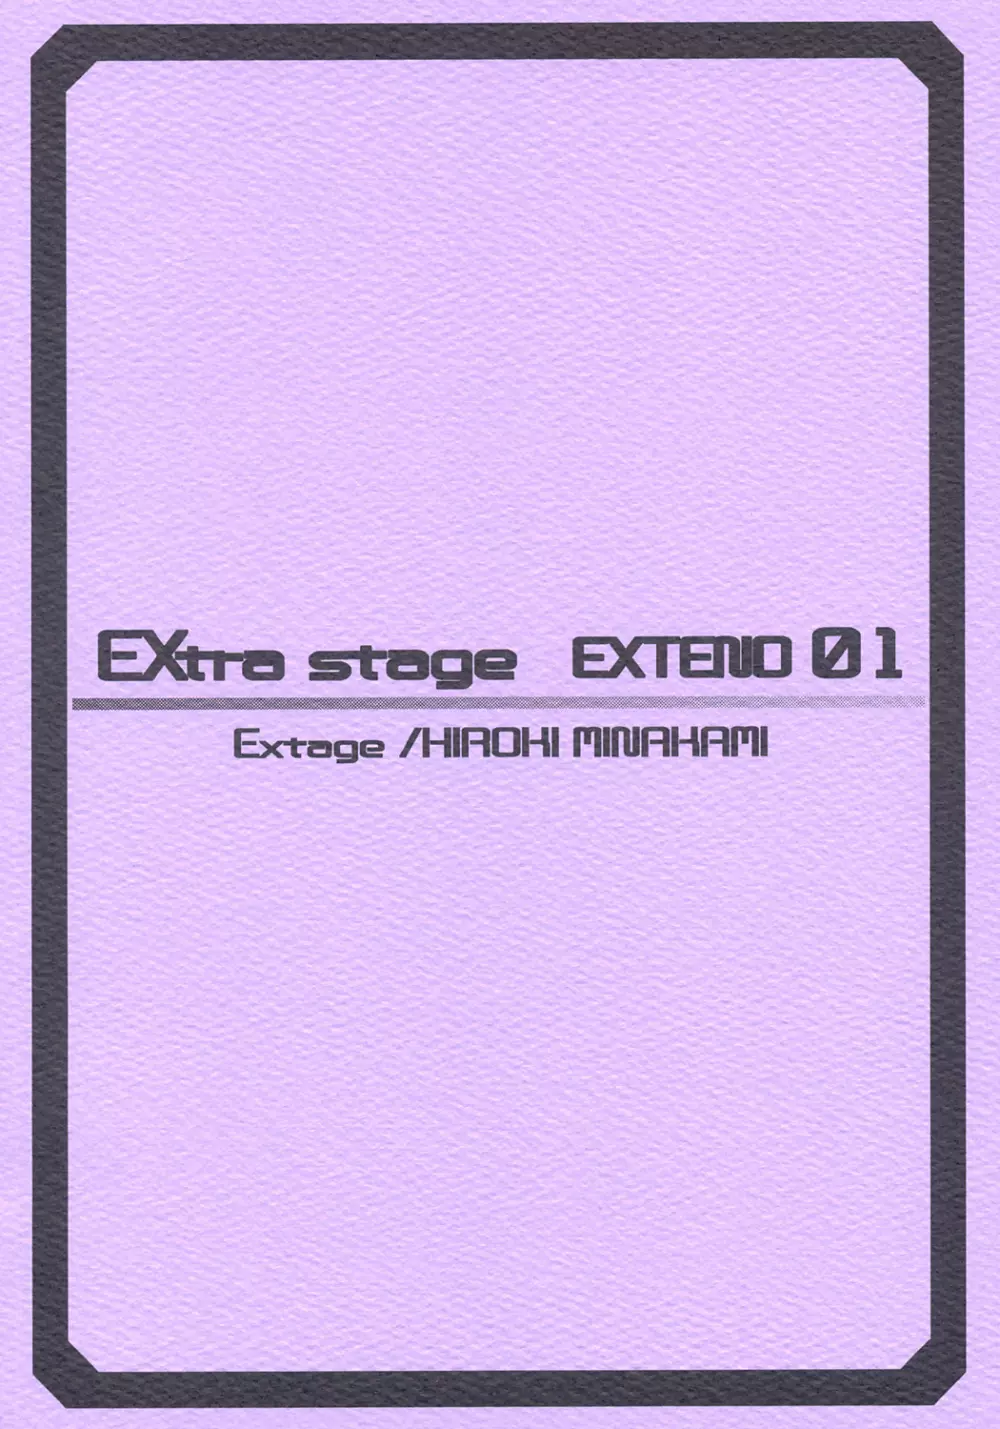 EXtra stage EXTEND 01 18ページ